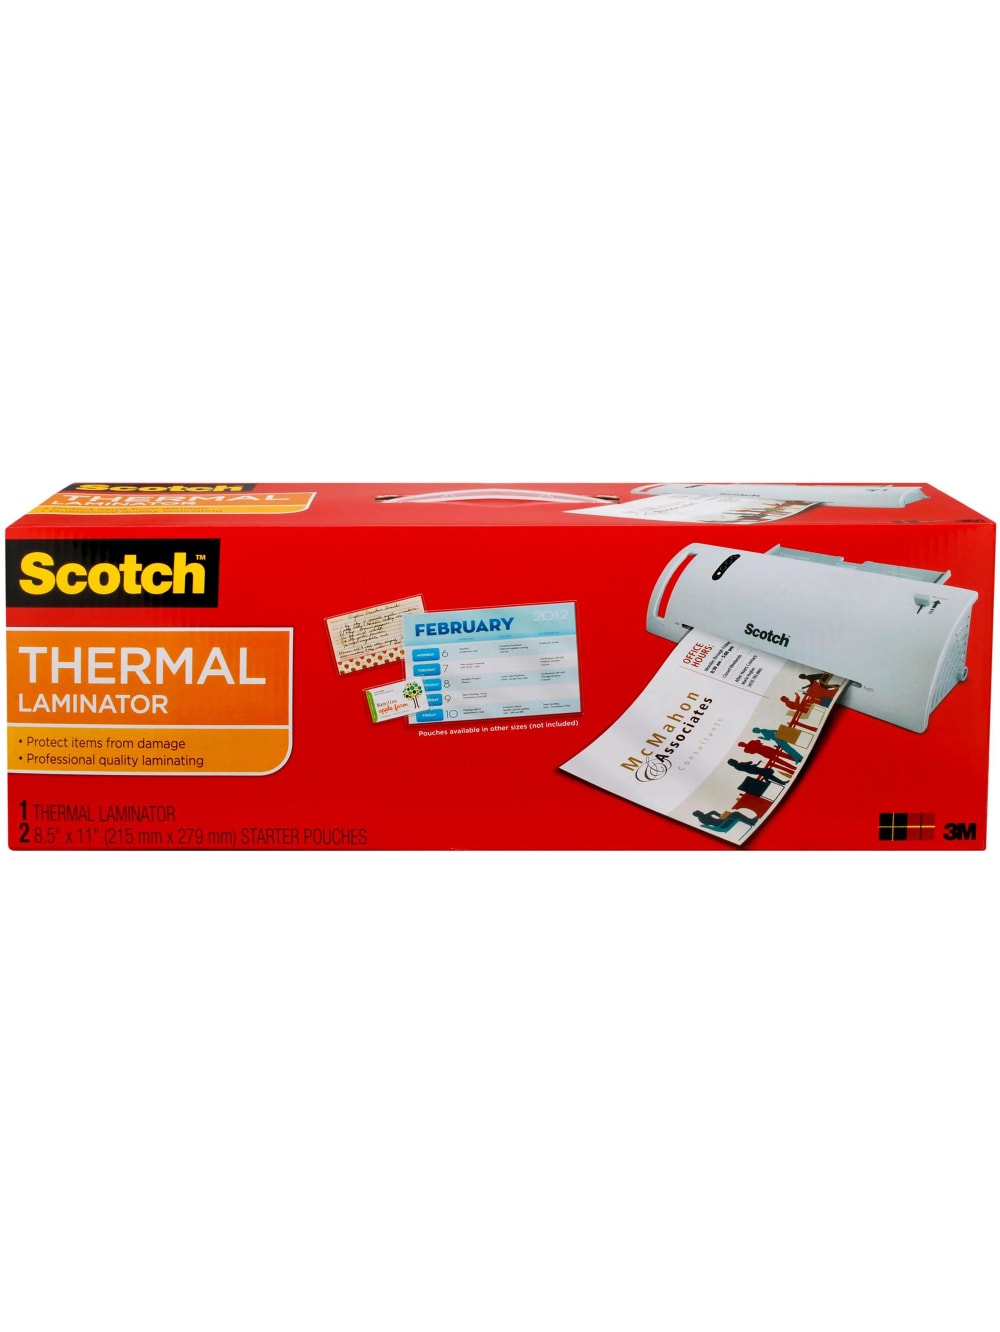 Scotch TL902A Thermal Laminator Combo Pack $19.99